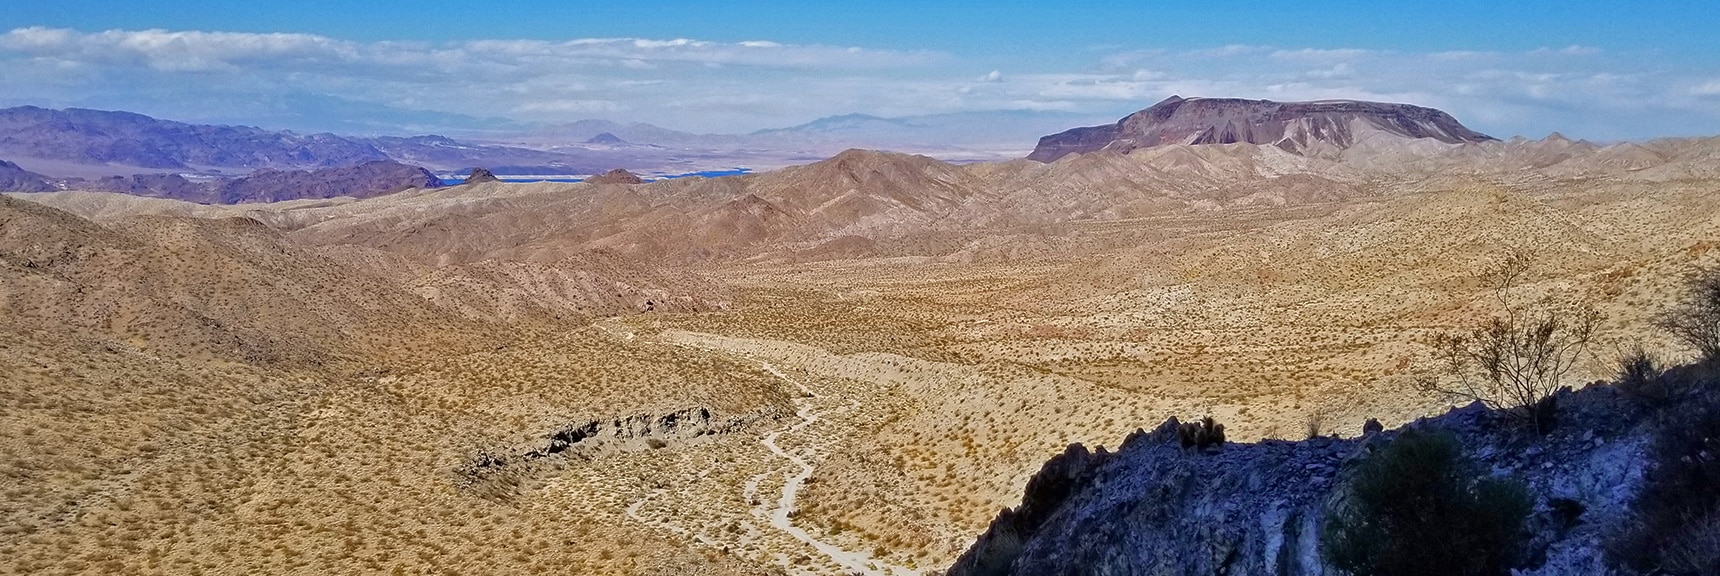 Horse Thief Canyon Road, Fortification Hill, Lake Mead, Frenchman Mt. Beyond | Mt Wilson, Black Mountains, Arizona, Lake Mead National Recreation Area